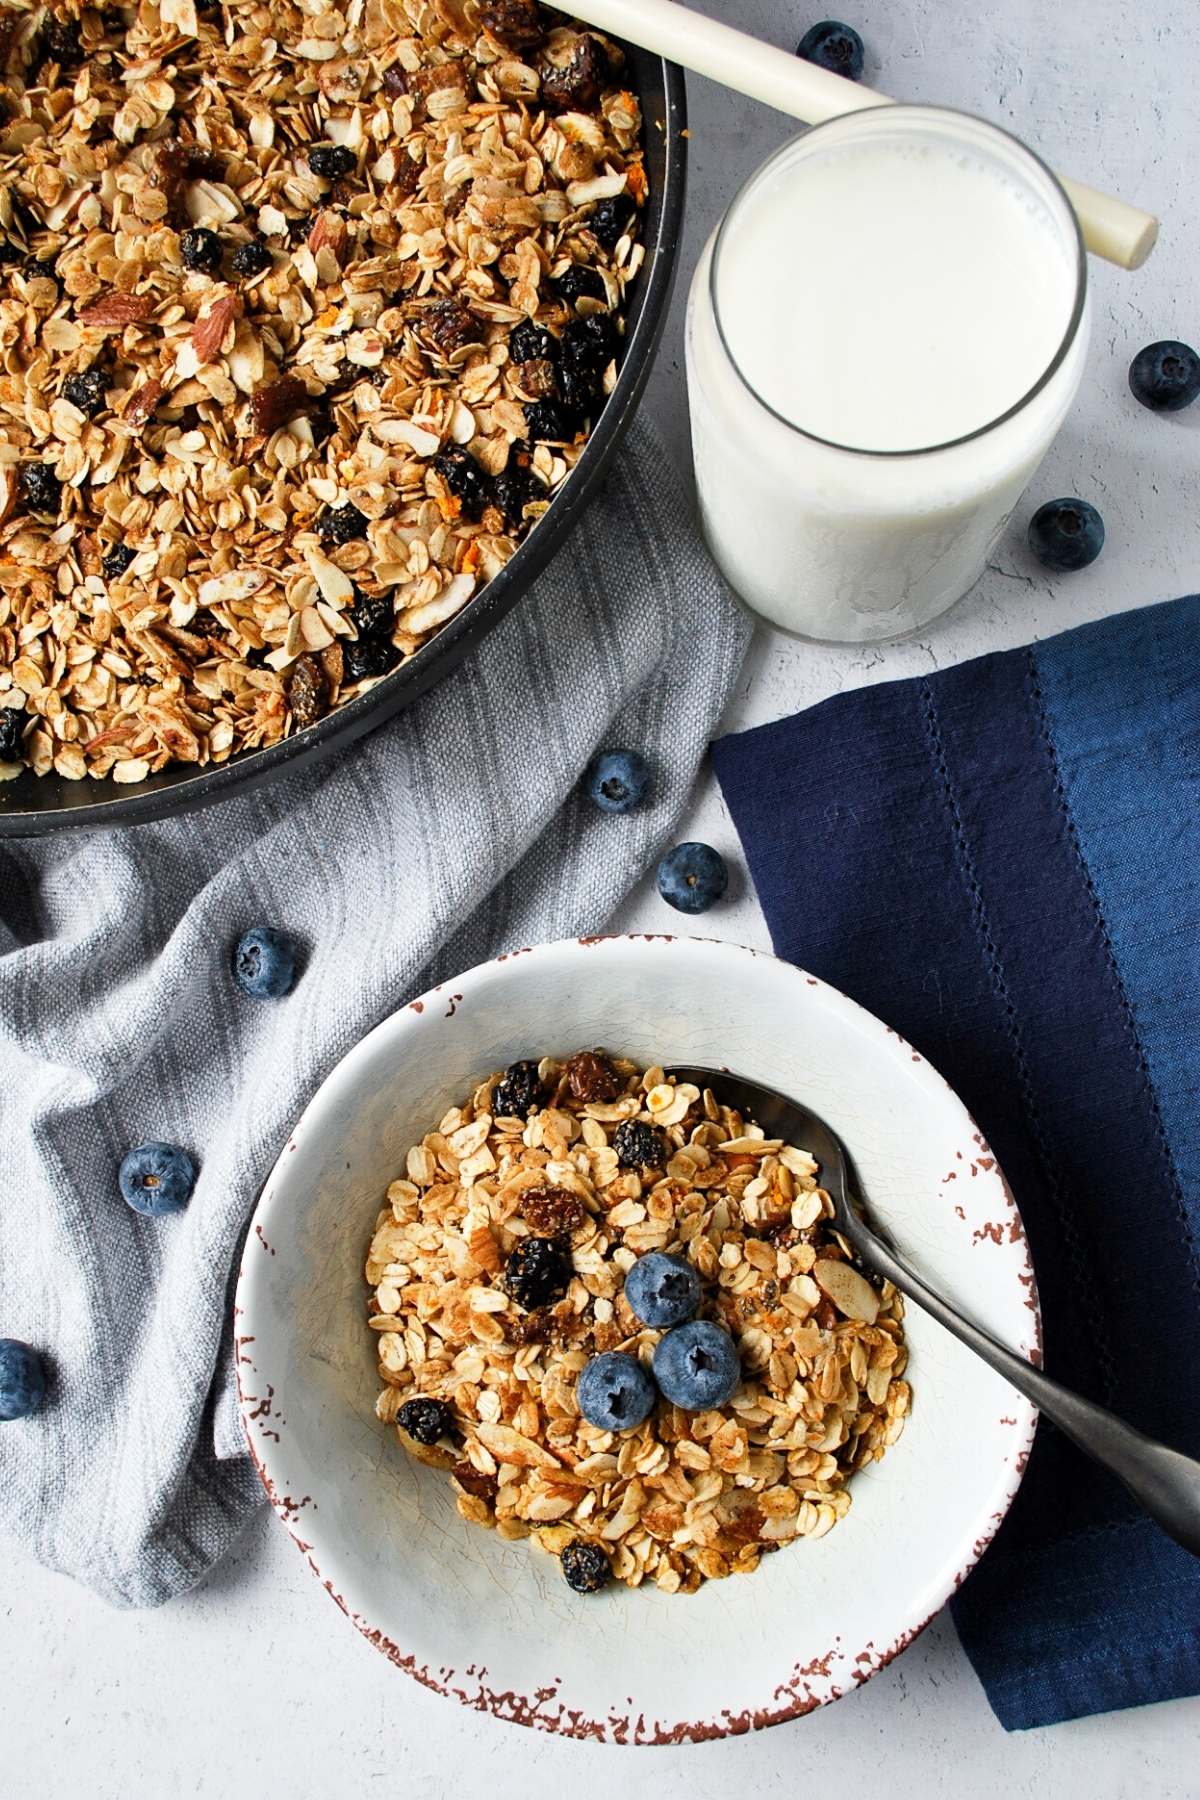 a bowl of blueberry granola next to a skillet of blueberry granola and a glass of milk